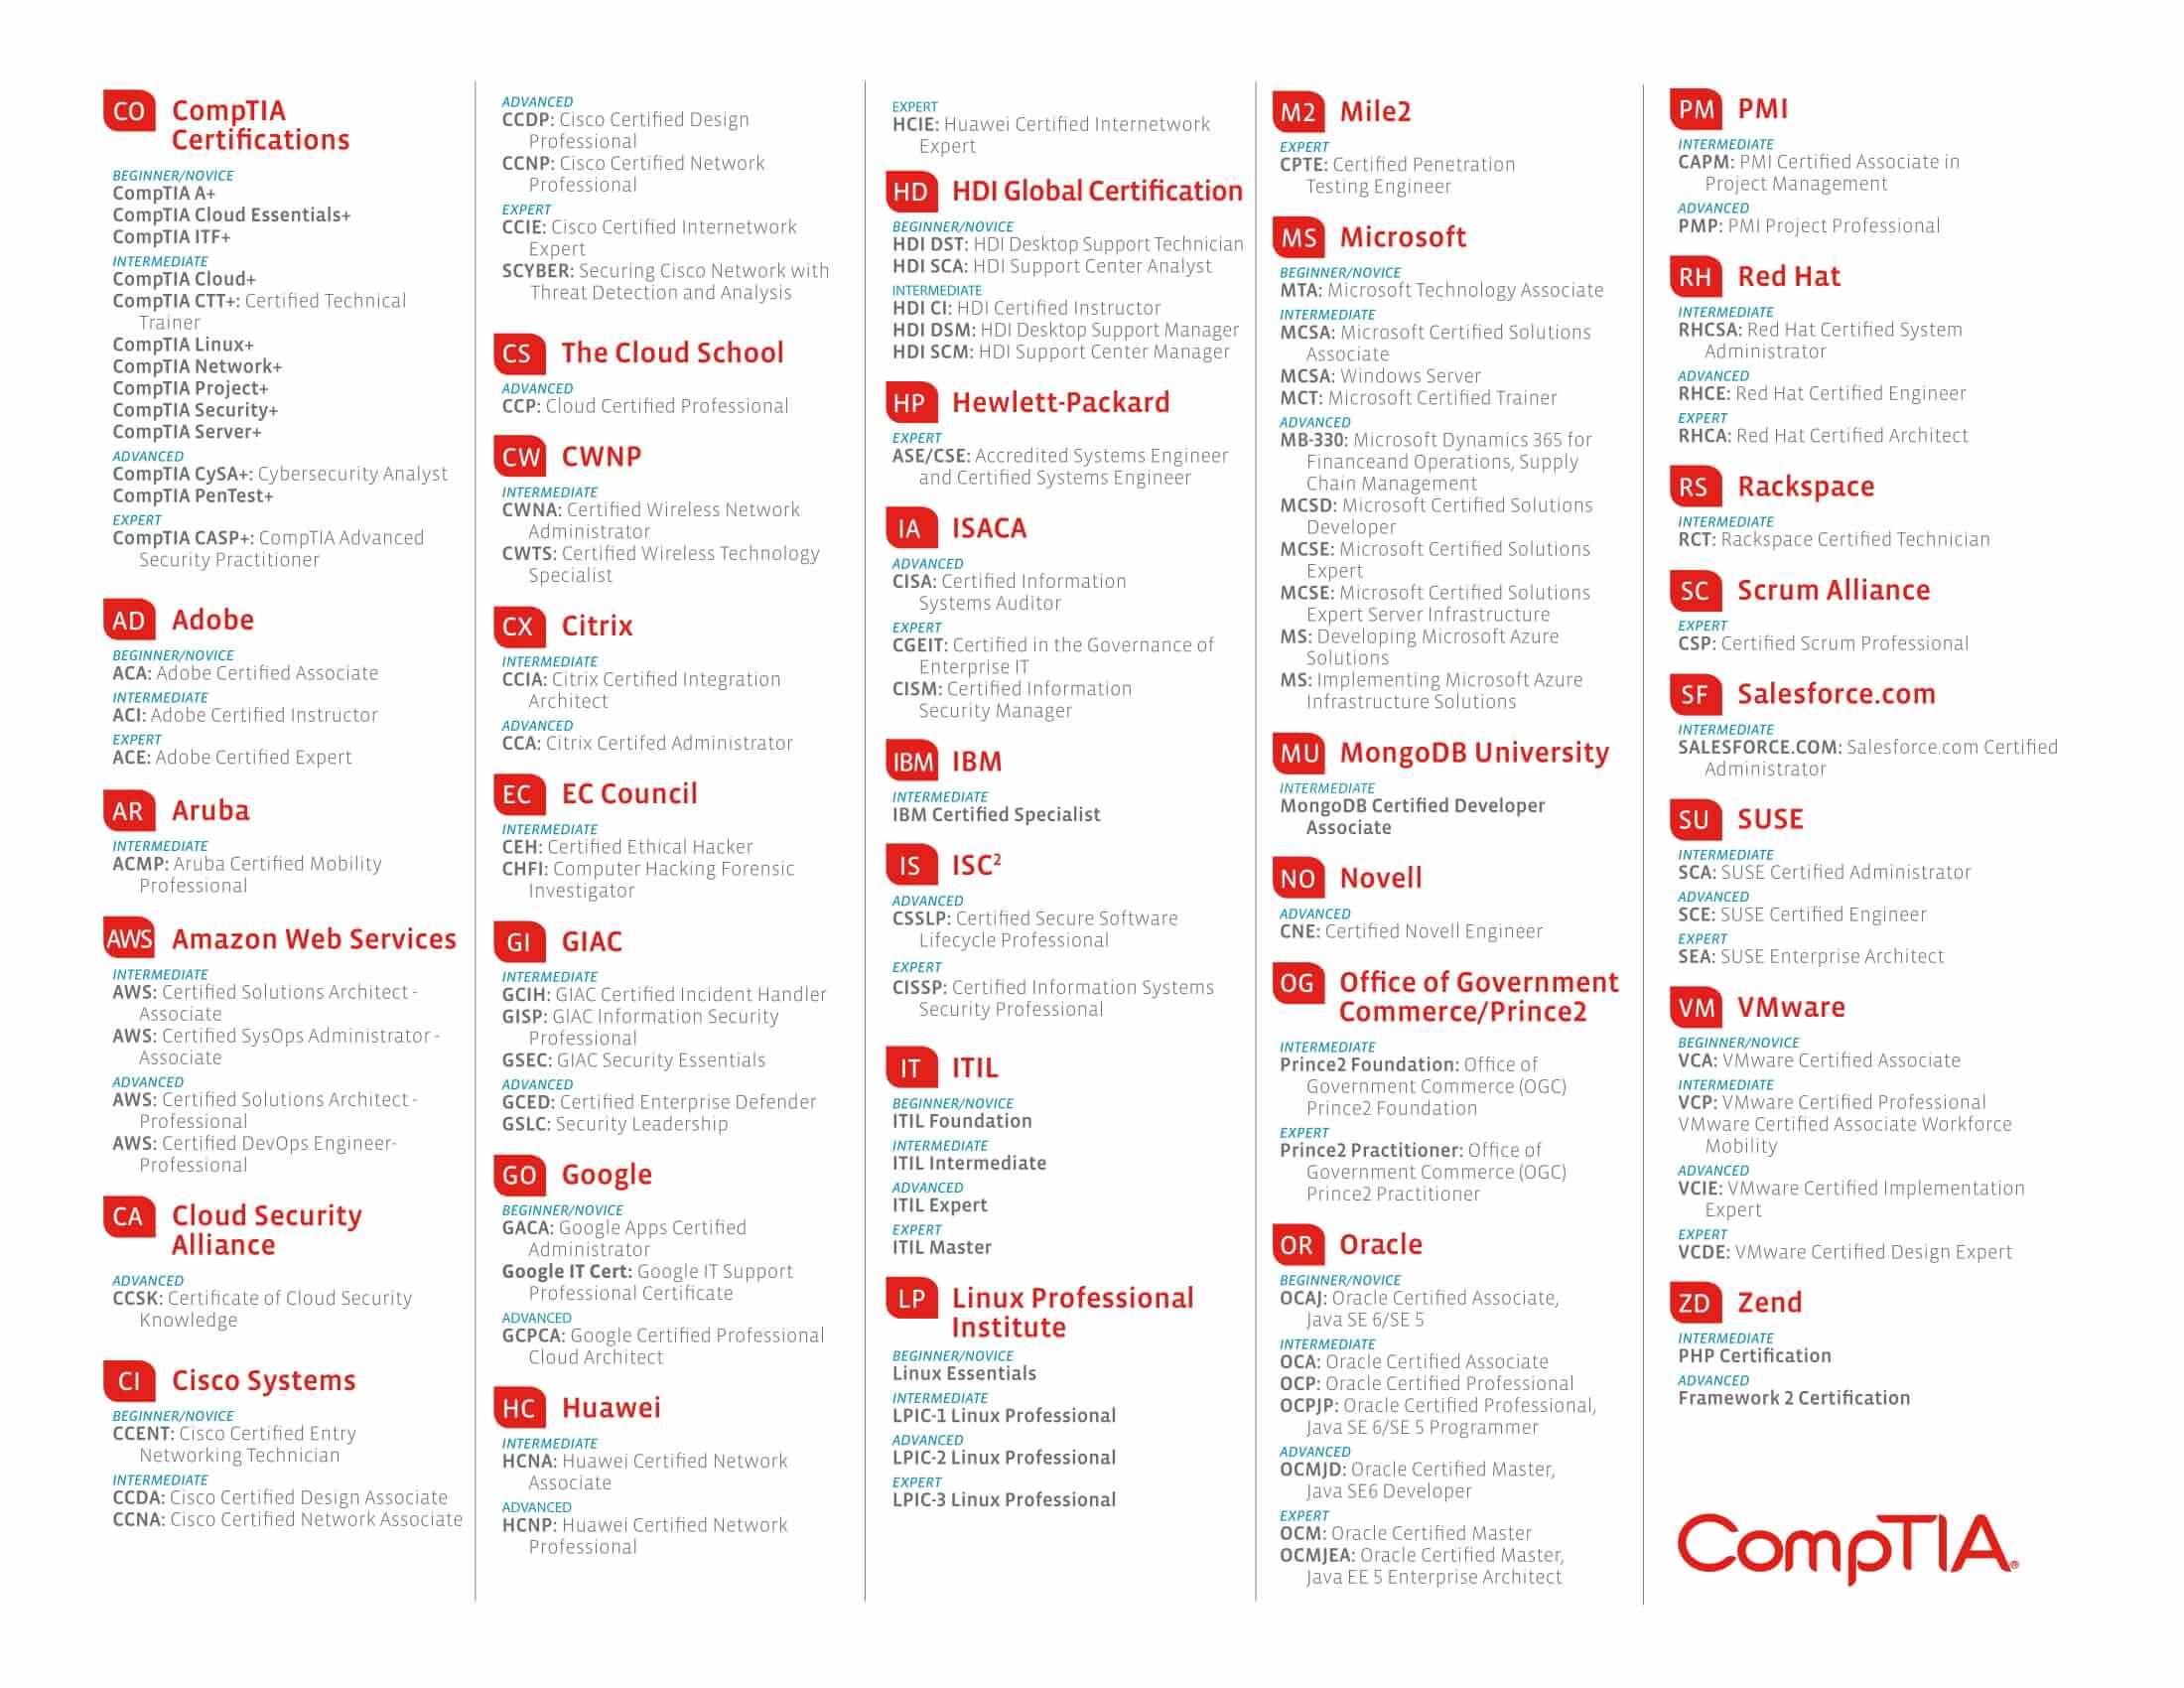 IT Certification Roadmap by CompTIA (2020) - Page 2